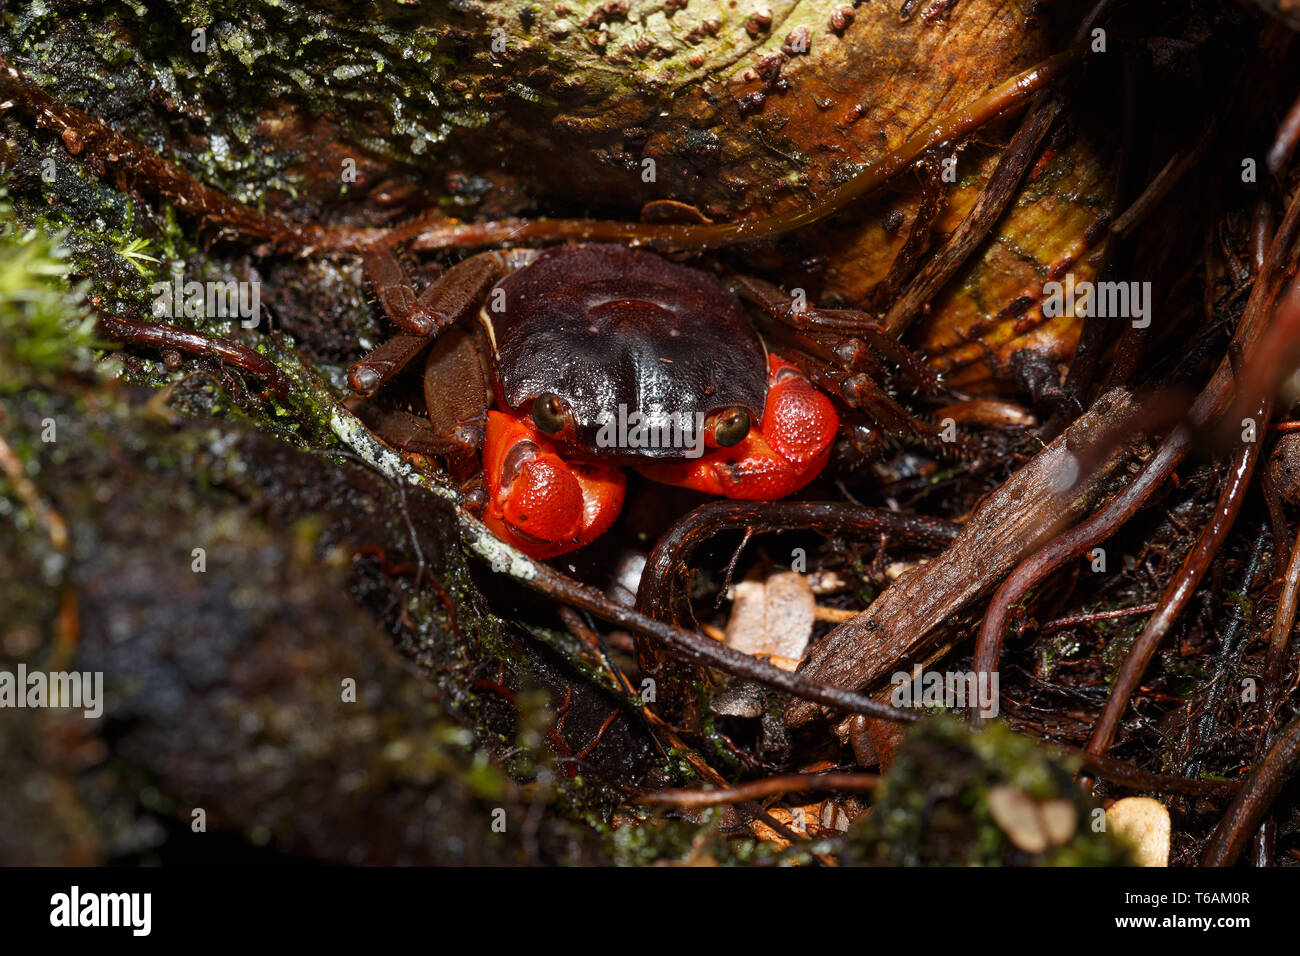 Forest Crab or Tree climbing Crab Madagascar Stock Photo